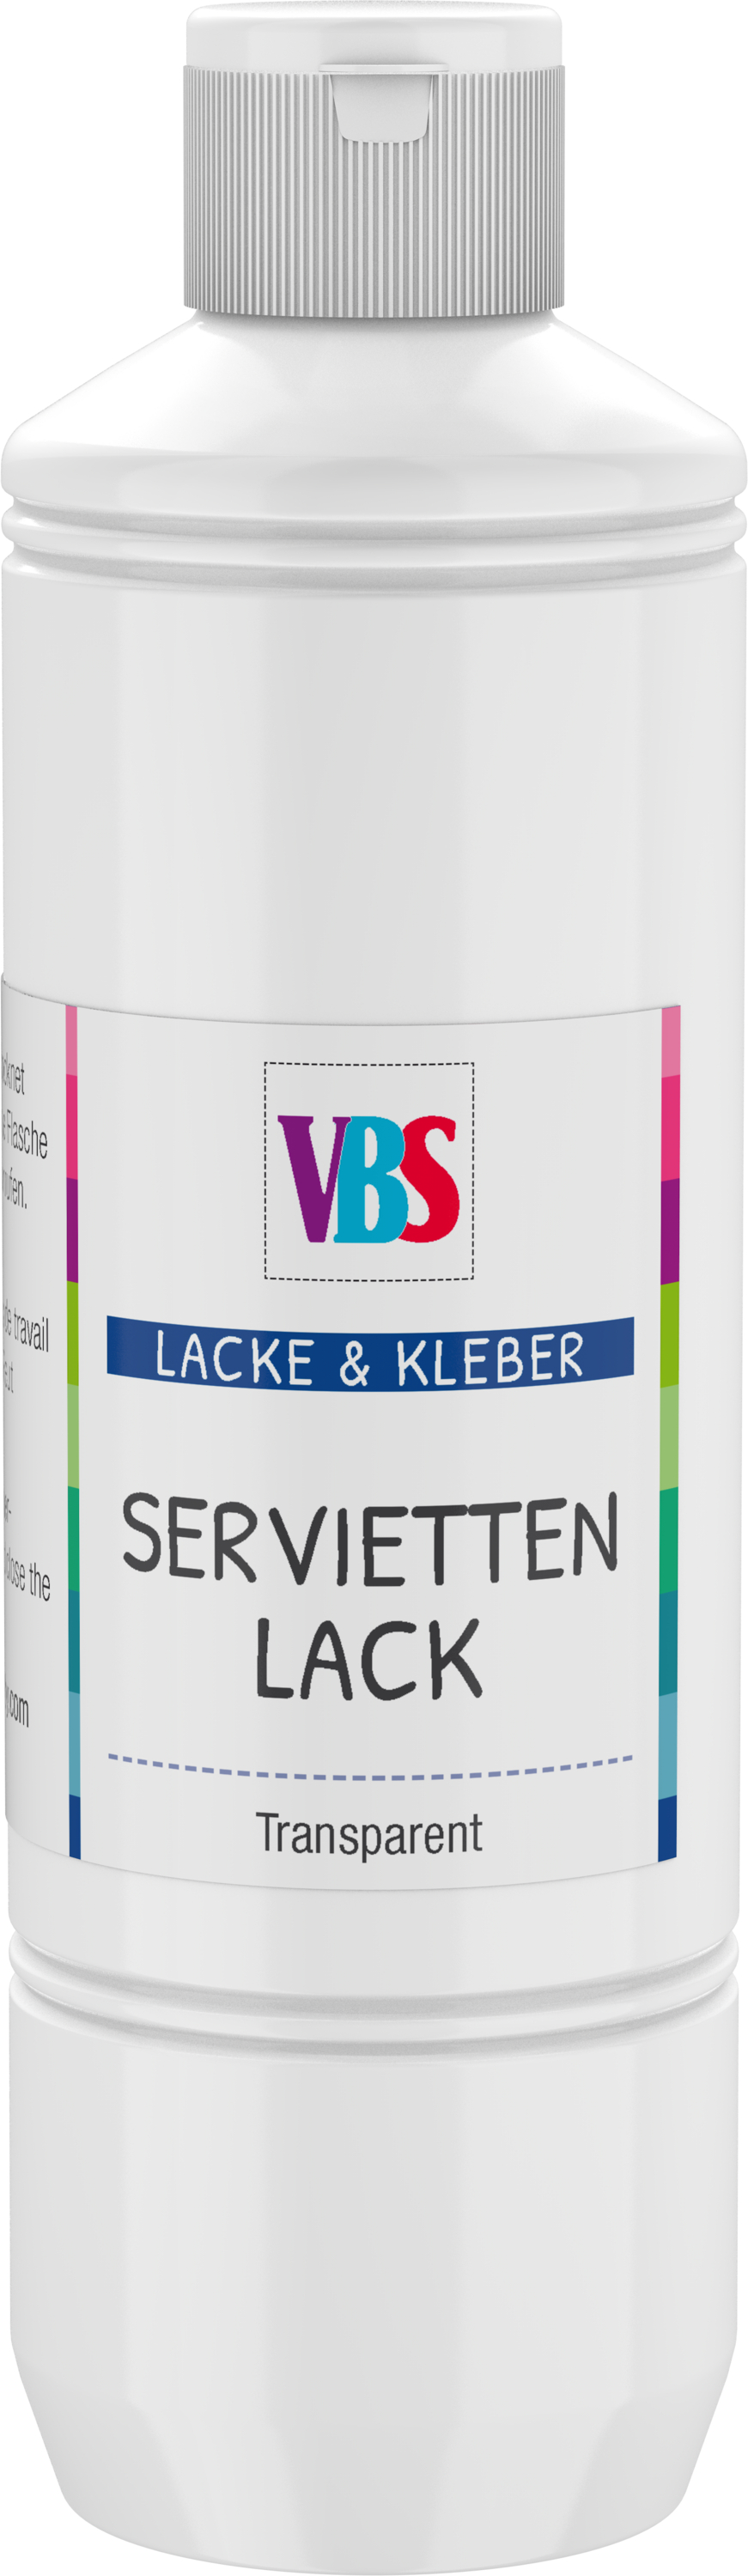 Laborthermometer - VBS Hobby